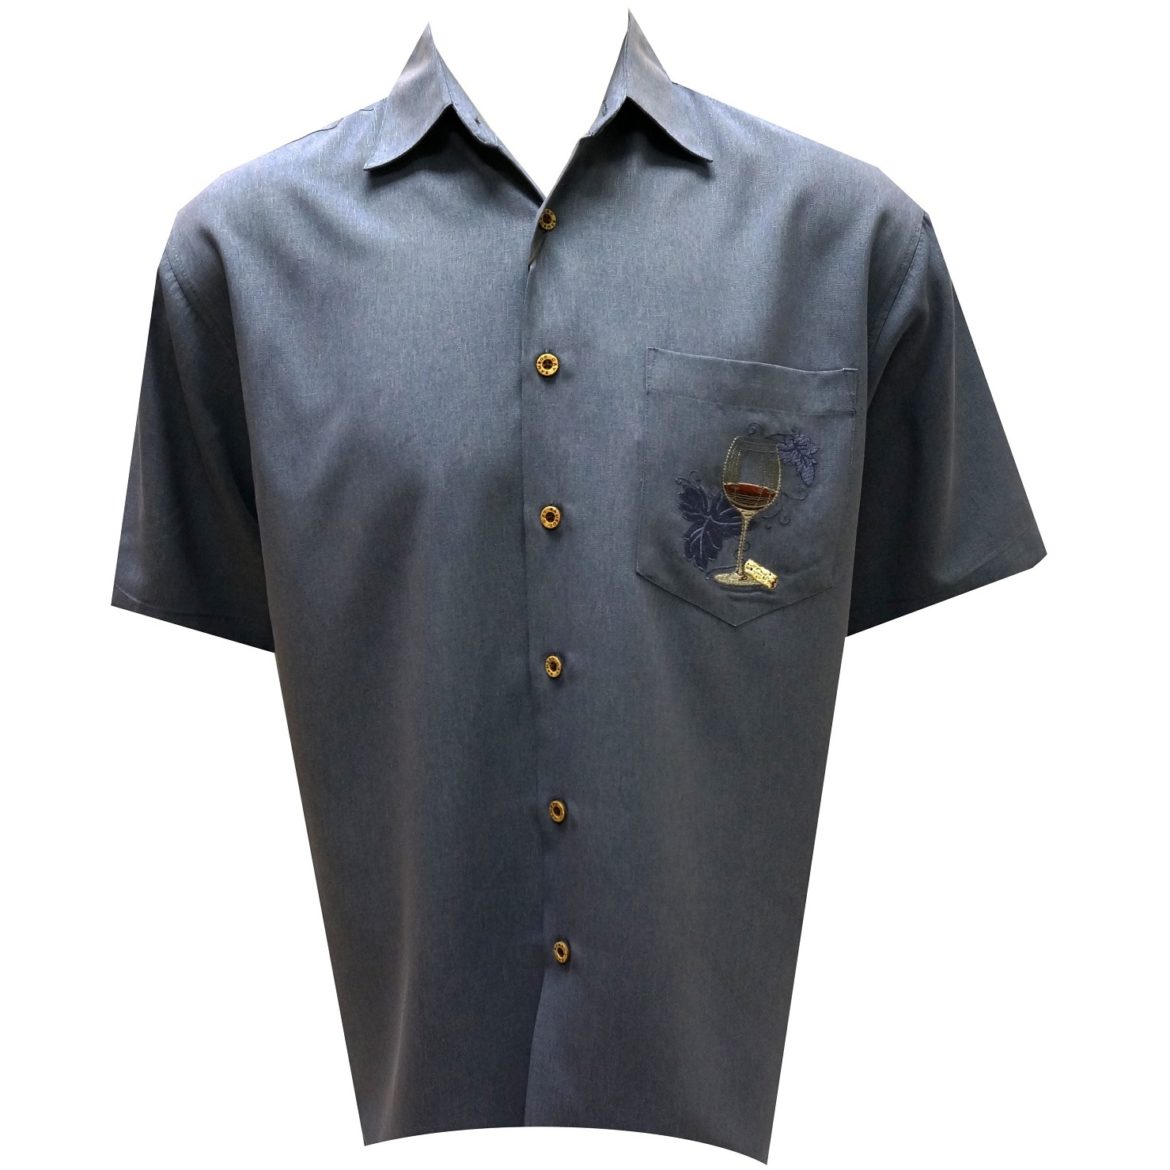 Bamboo Cay - Mens Shirt - Relax & Unwined - Infra Blue - Front view